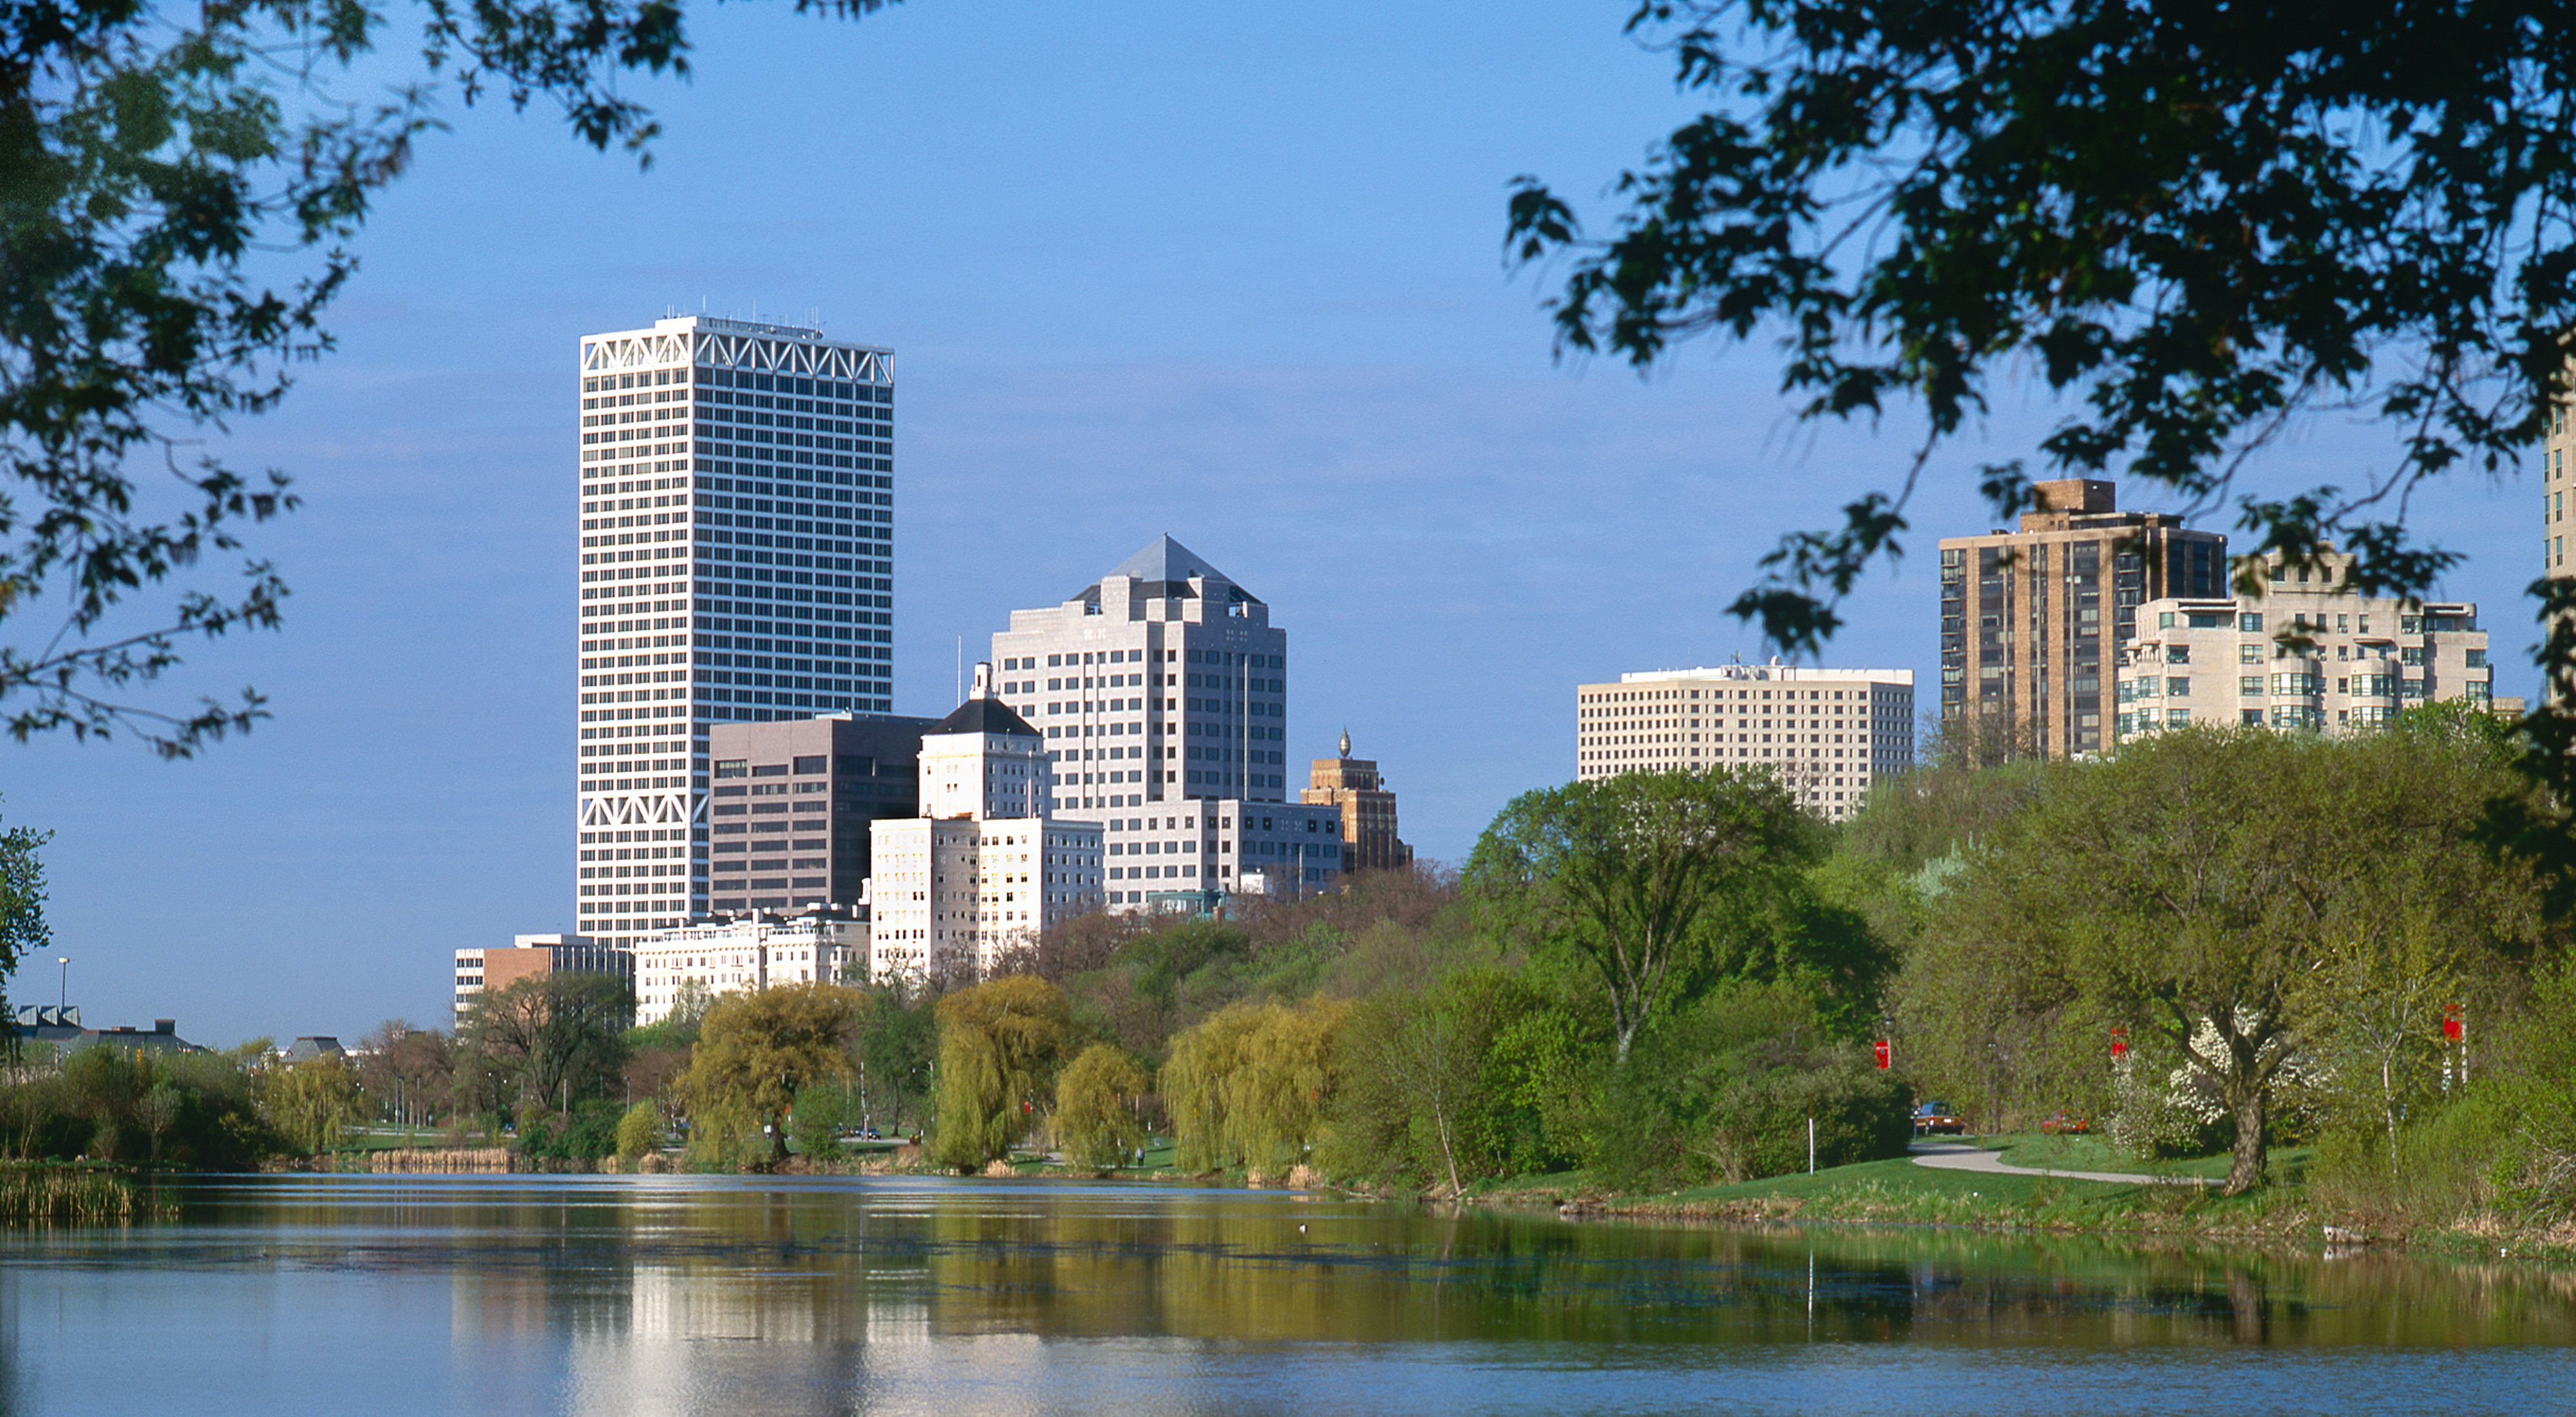 View of a city skyline with tall buildings in the background and trees and grass along the shoreline of a small lake.